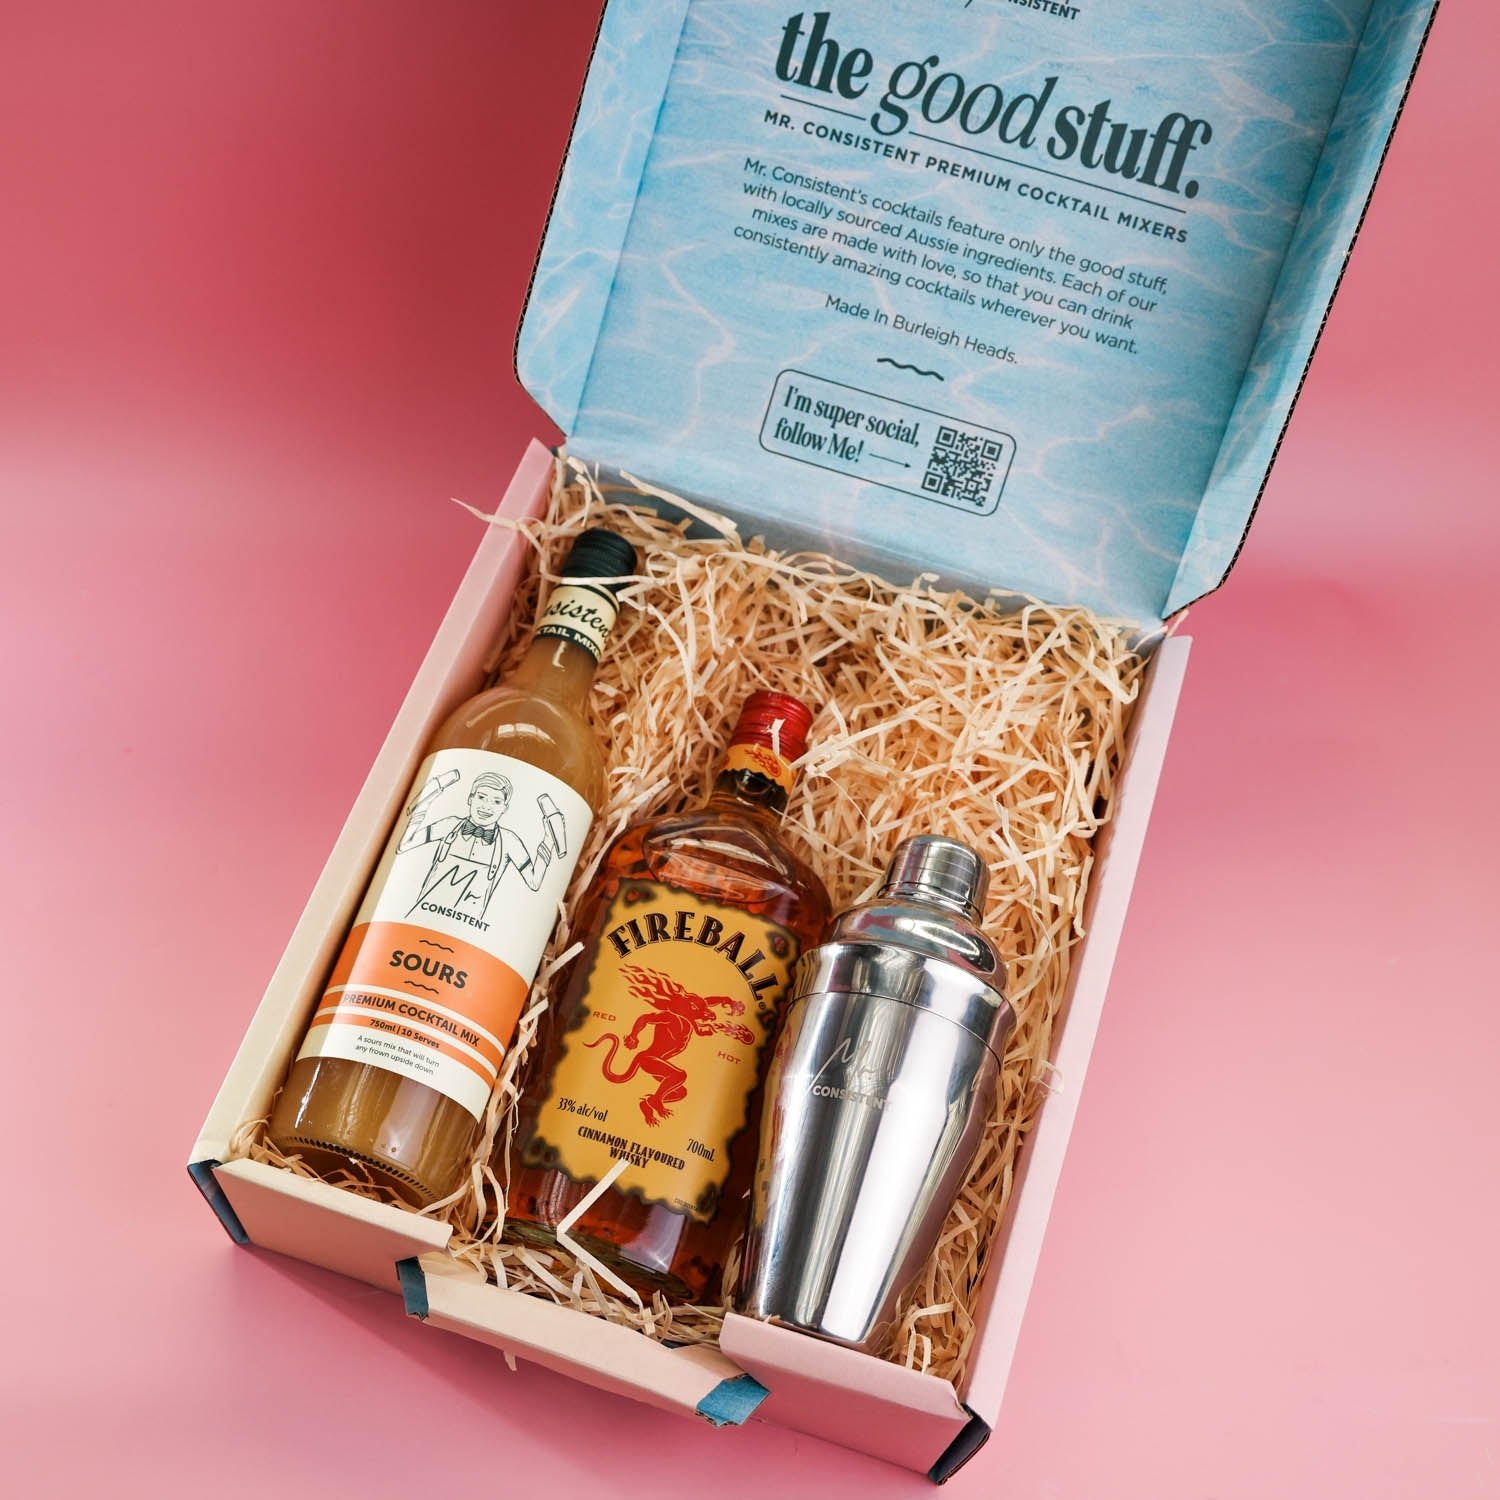 Fireball Sours Gift Pack - Booze Included! - Mr. Consistent